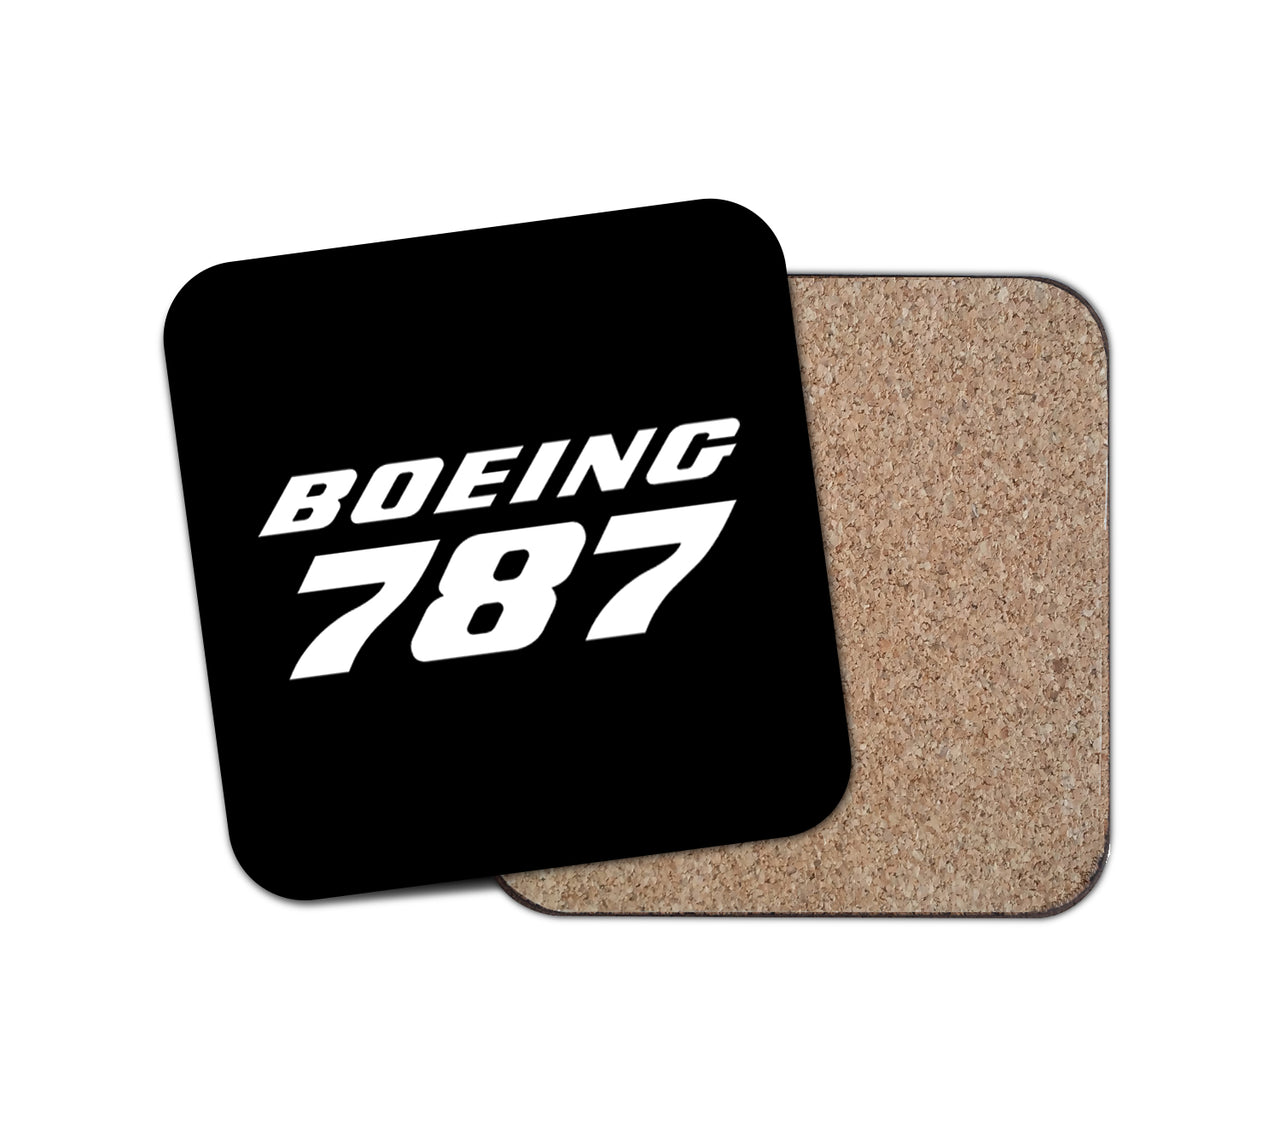 Boeing 787 & Text Designed Coasters